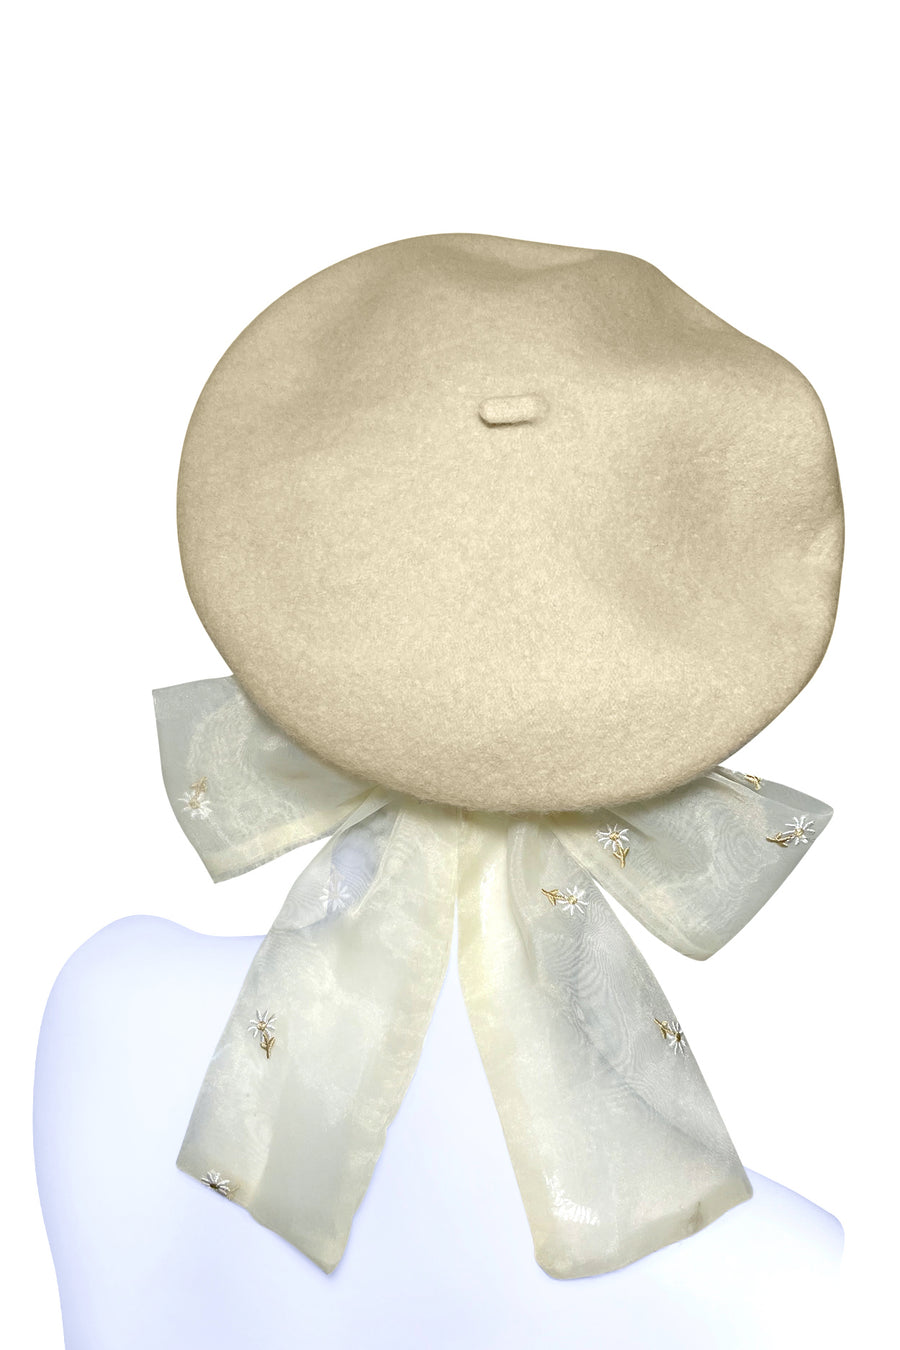 Camel beret with a floral bow  - NEW ! Limited edition !